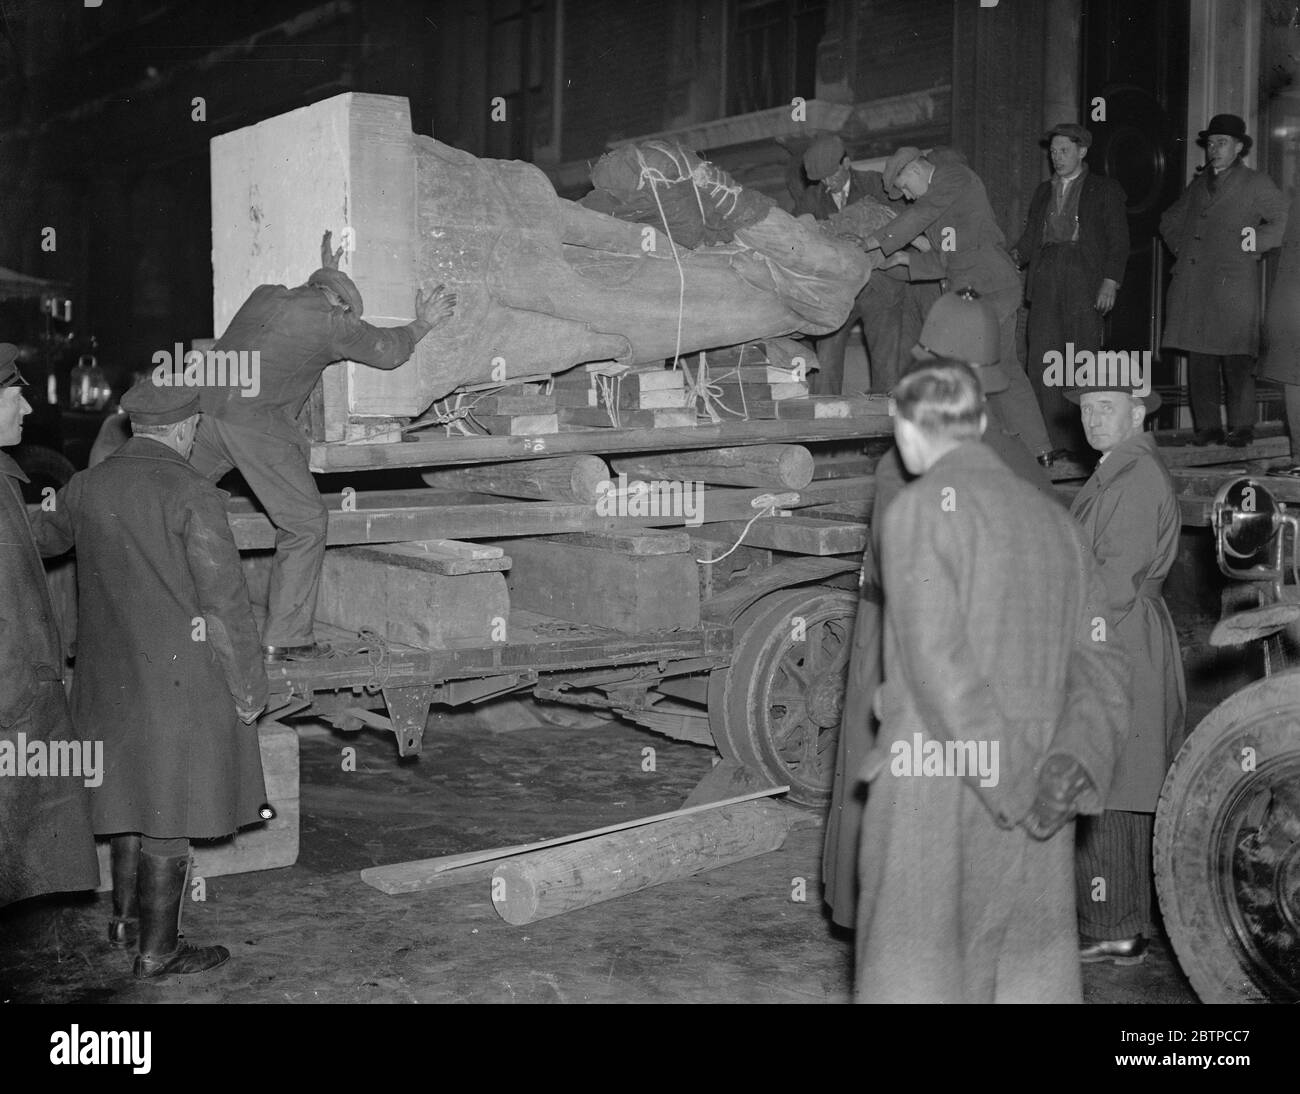 A herculean task . A giant statue of Hercules was removed in the early hours of the morning from the Jermyn street branch of the Victoria and Albert Museum to the South Kensington building . The huge statue being placed in position on the trailer . 27 February 1932 Stock Photo